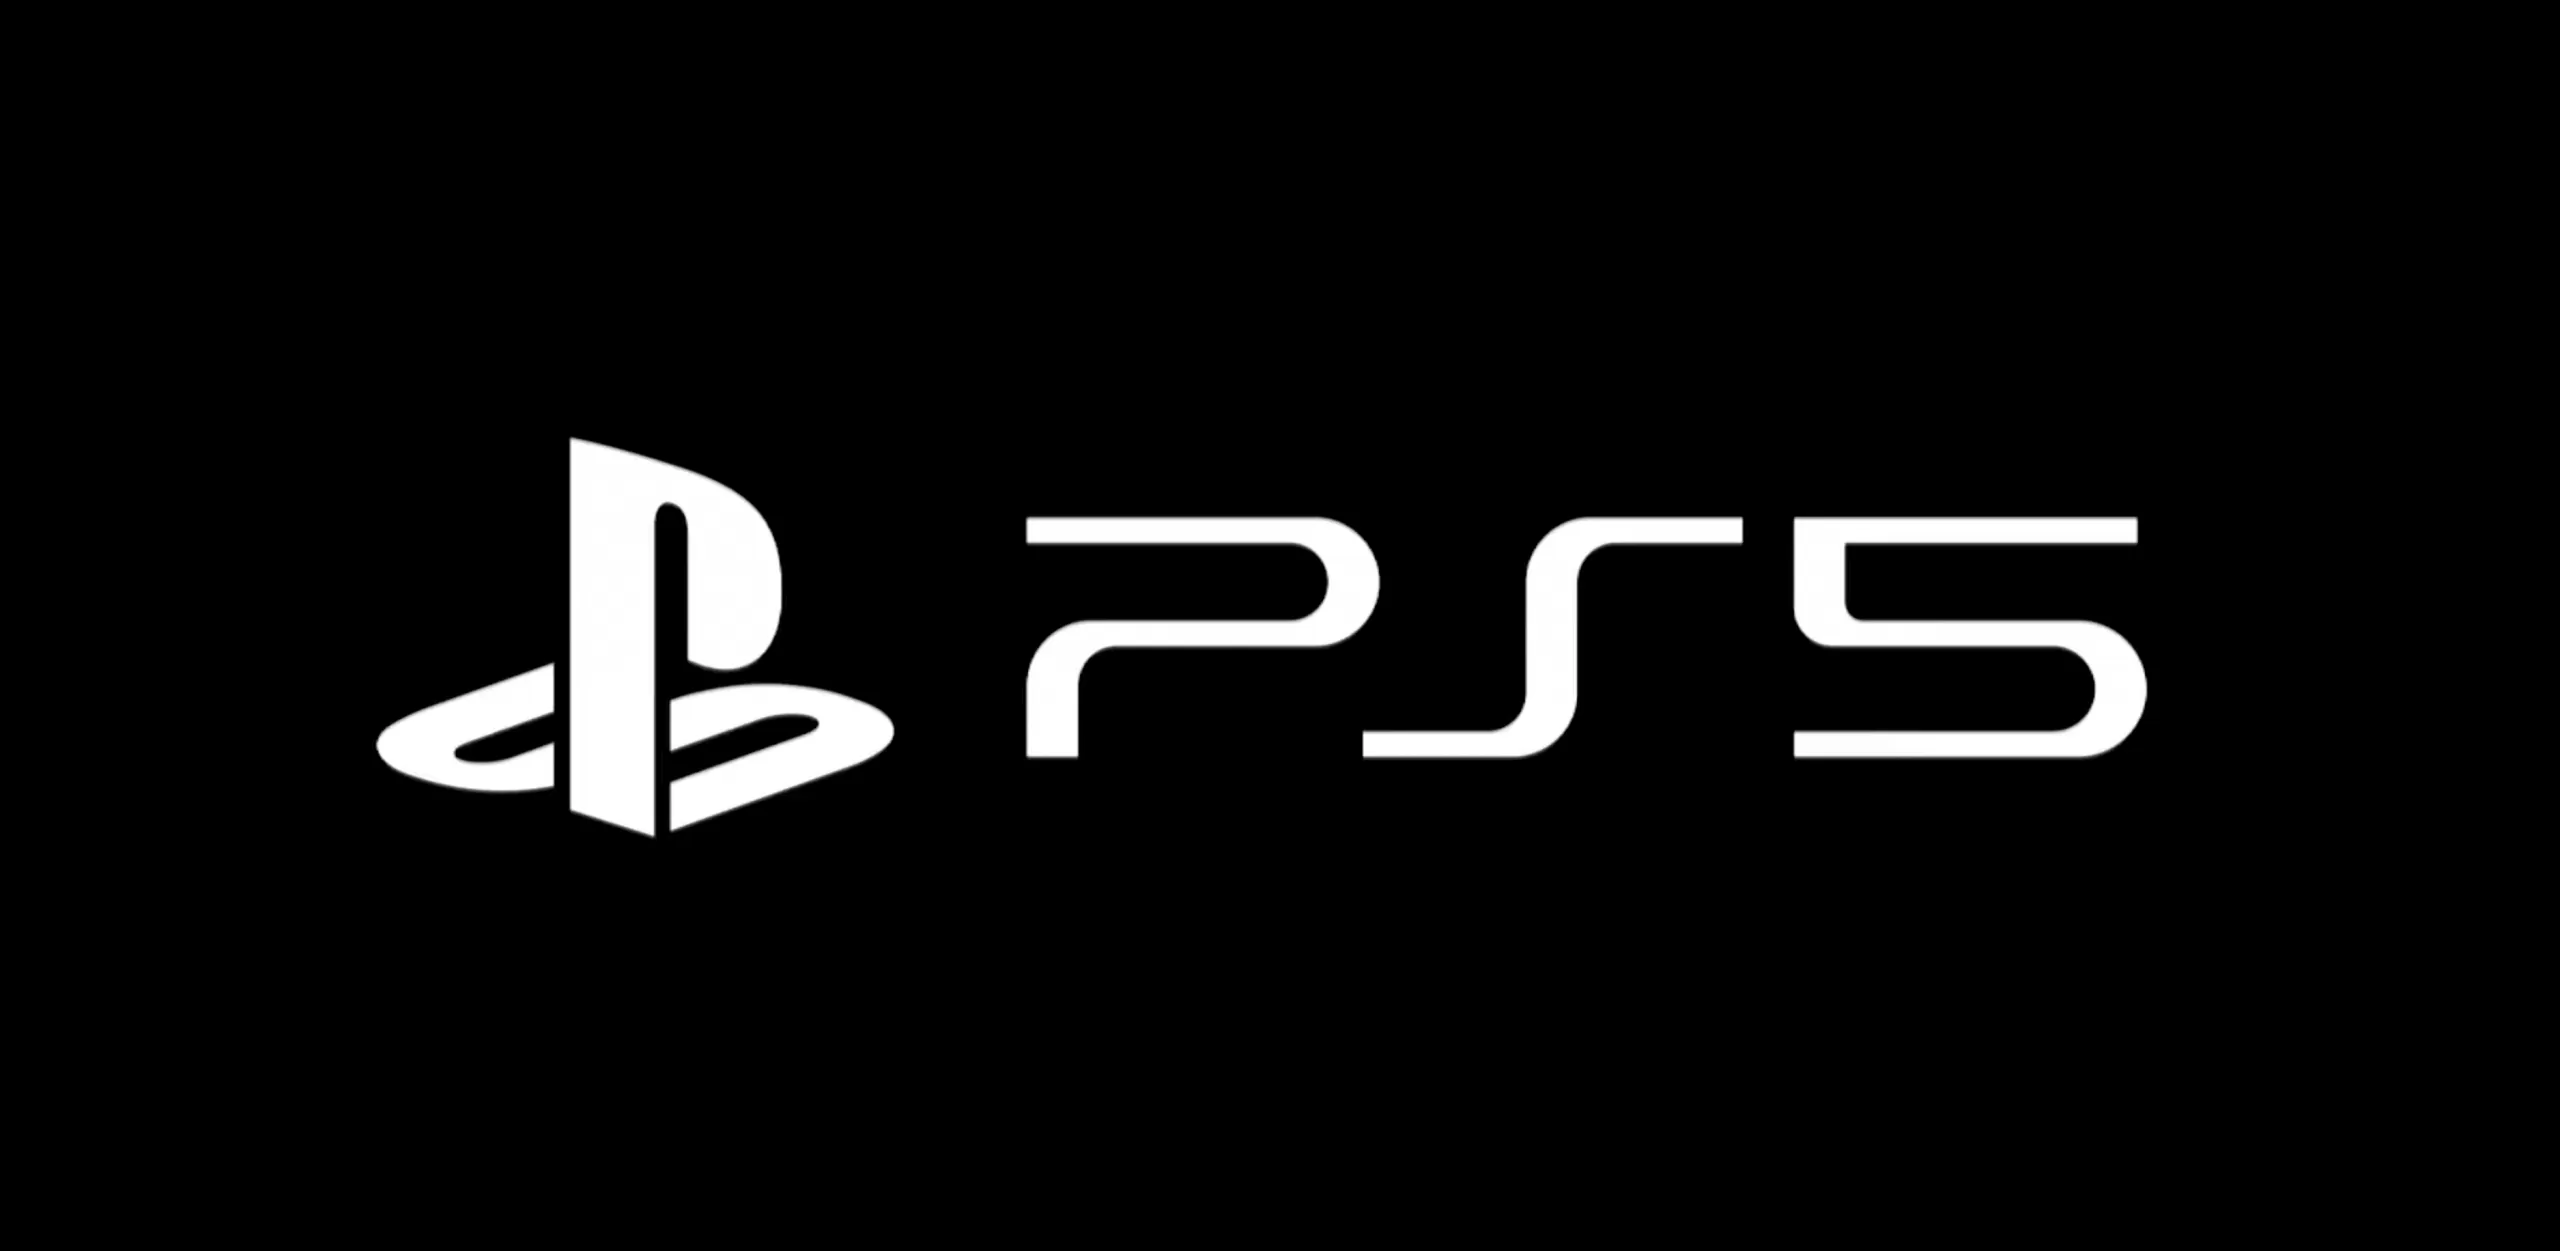 Sony revealed the logo for the PlayStation 5 and the internet made fun of it